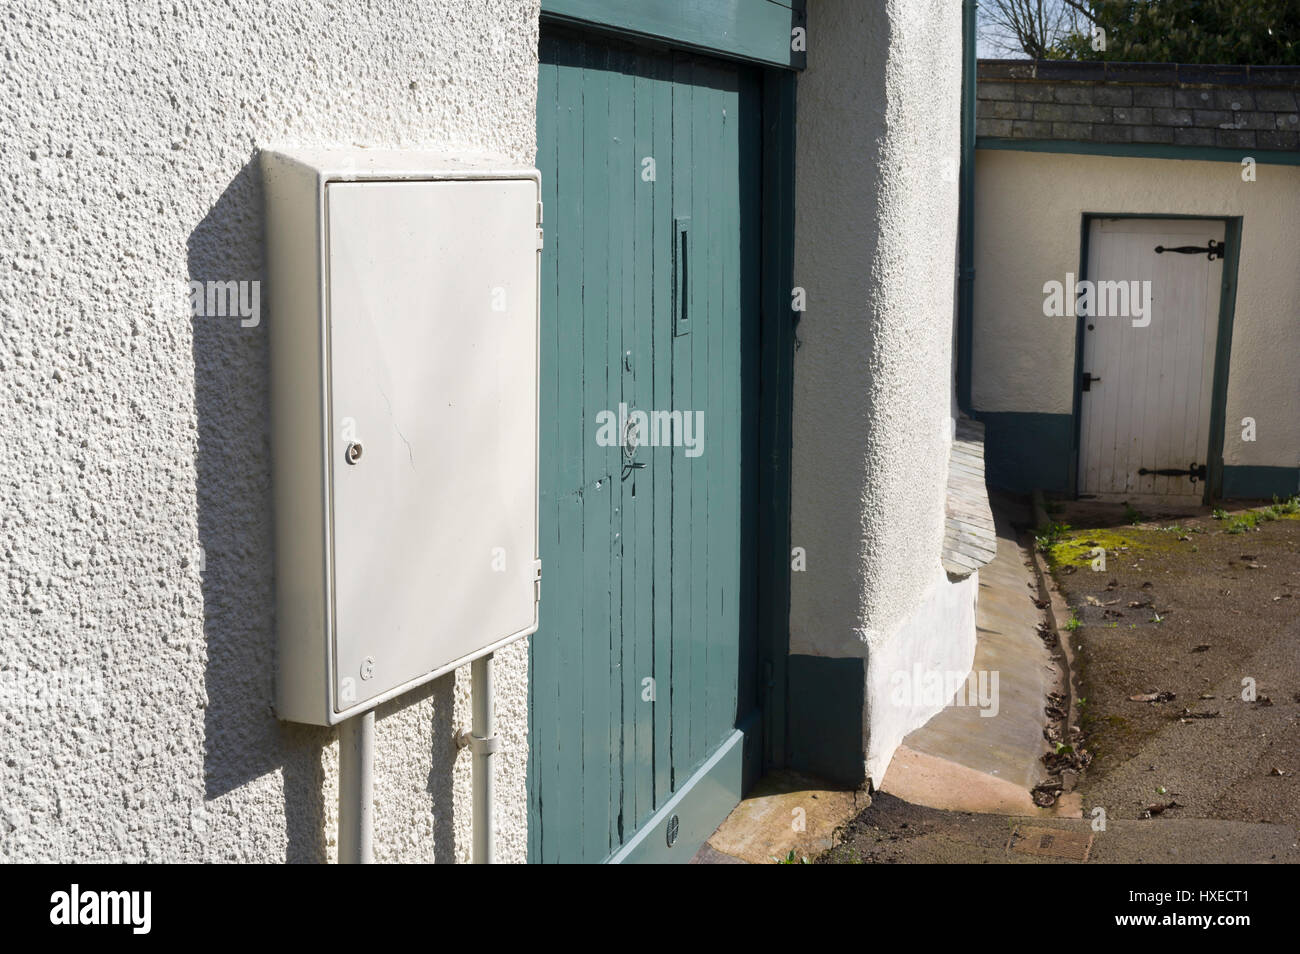 White electricity box on the wall of a house Stock Photo